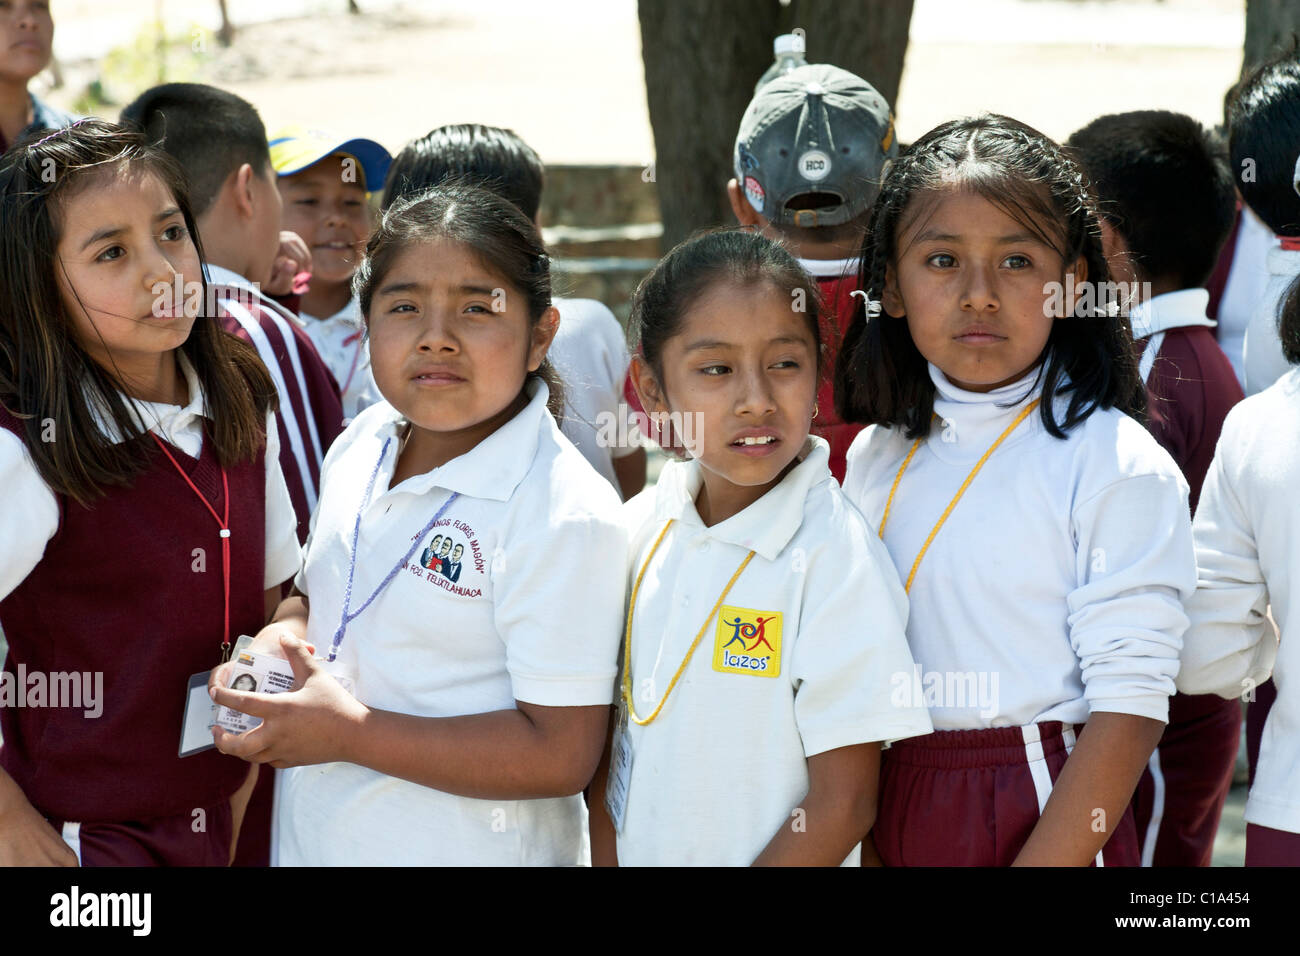 faces of young Mexican girls grade school children on school outing to ruins of ancient Zapotec capital city of Monte Alban Stock Photo